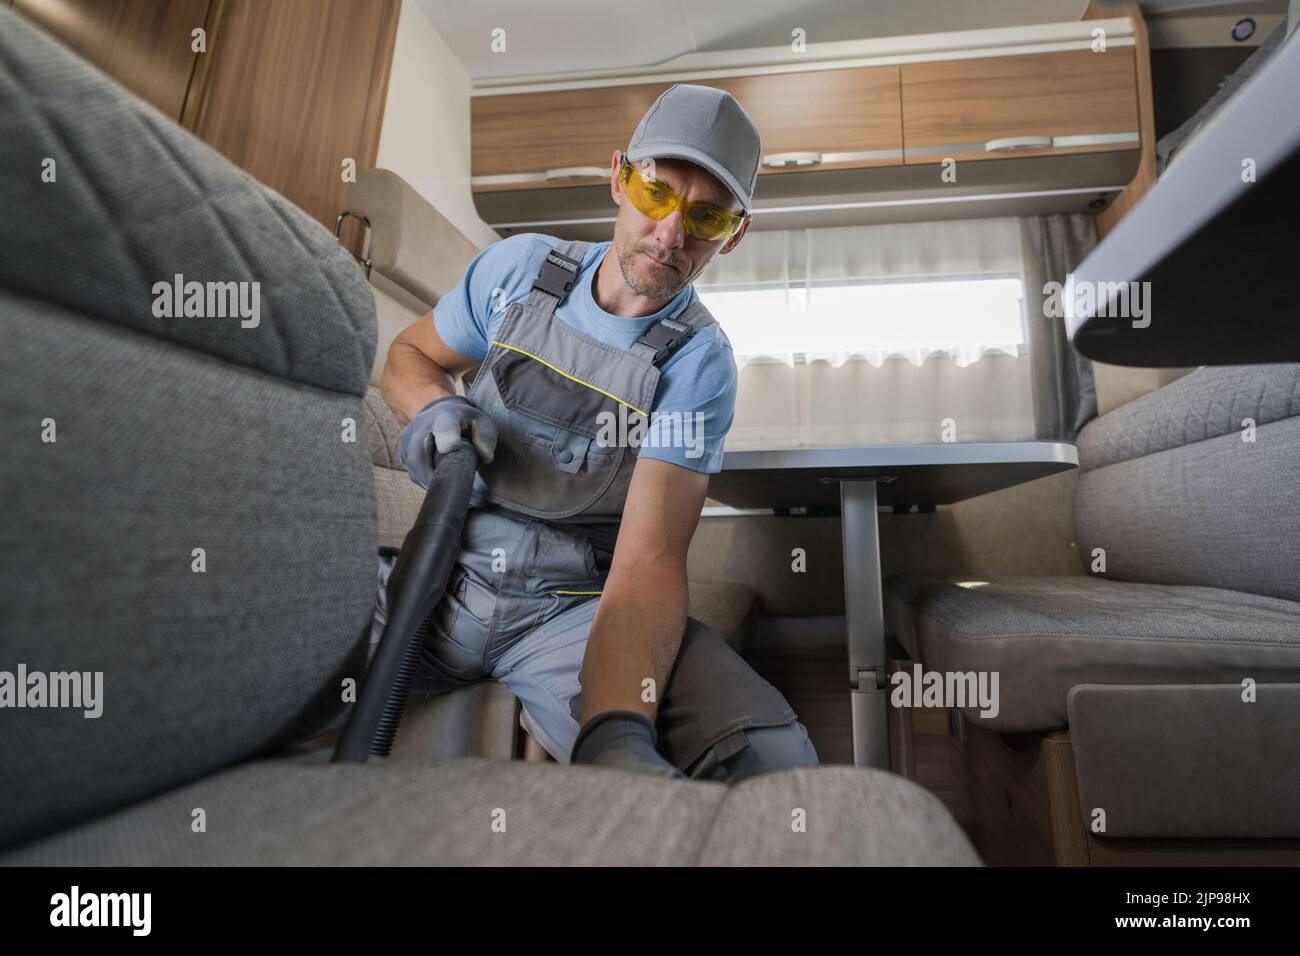 Caucasian Male Worker Taking Care of Camper Van Interior by Cleaning the Furniture with Vacuum Cleaner. Camping Season Preparations. Recreational Vehi Stock Photo